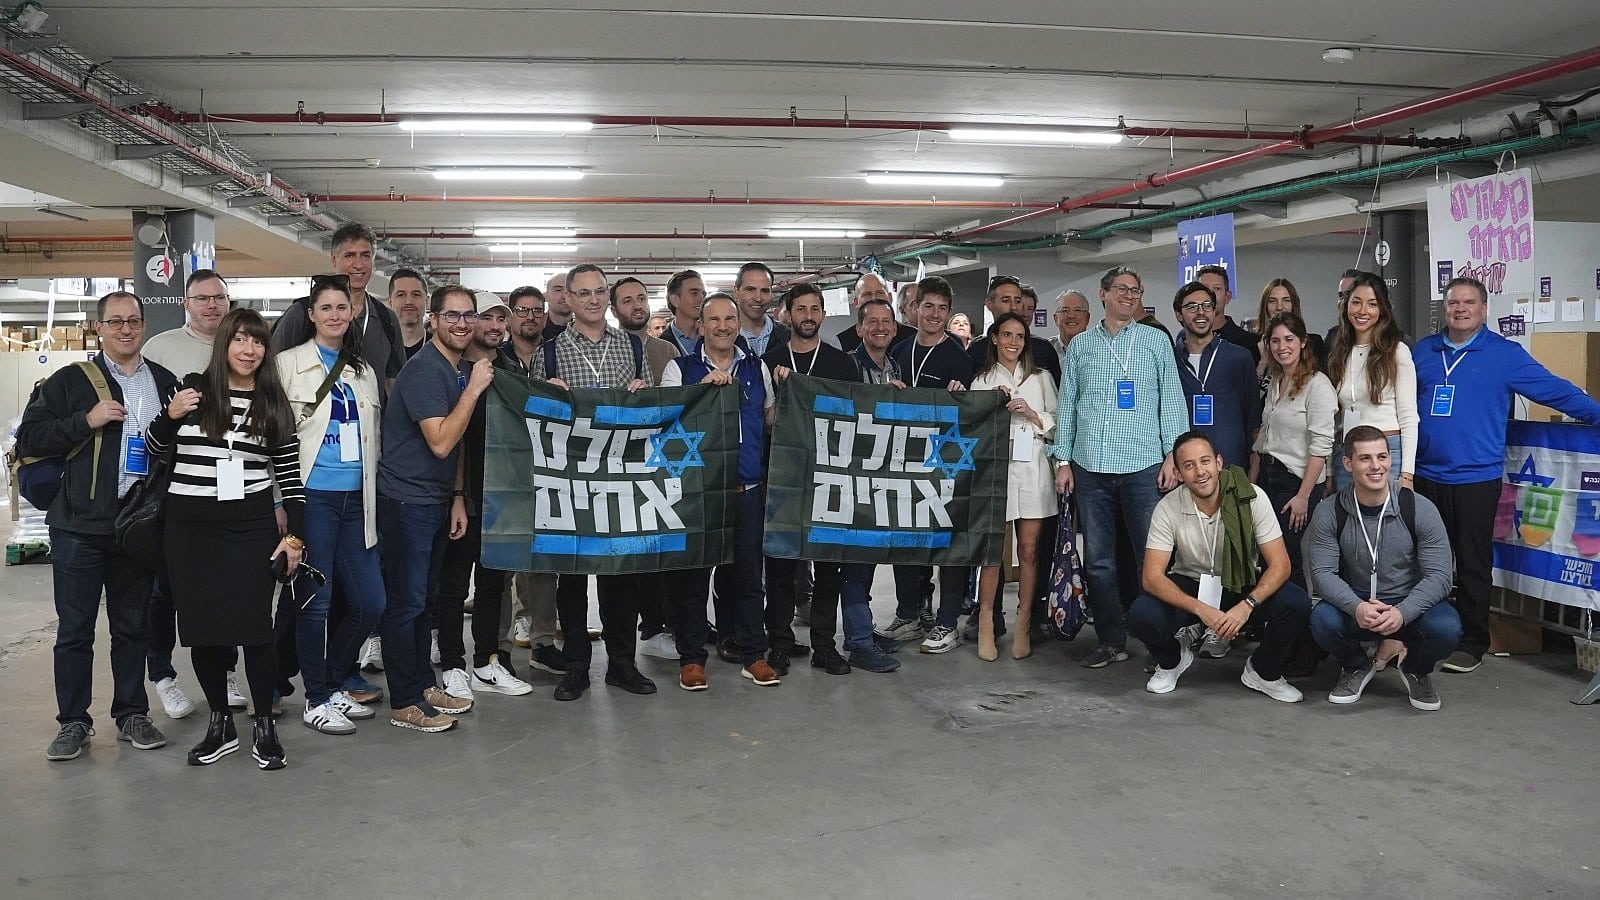 Participants in the December 17-20 Israel Tech Mission from the United States. The banners read, "We are all brothers." Photo courtesy of Israel Tech Mission